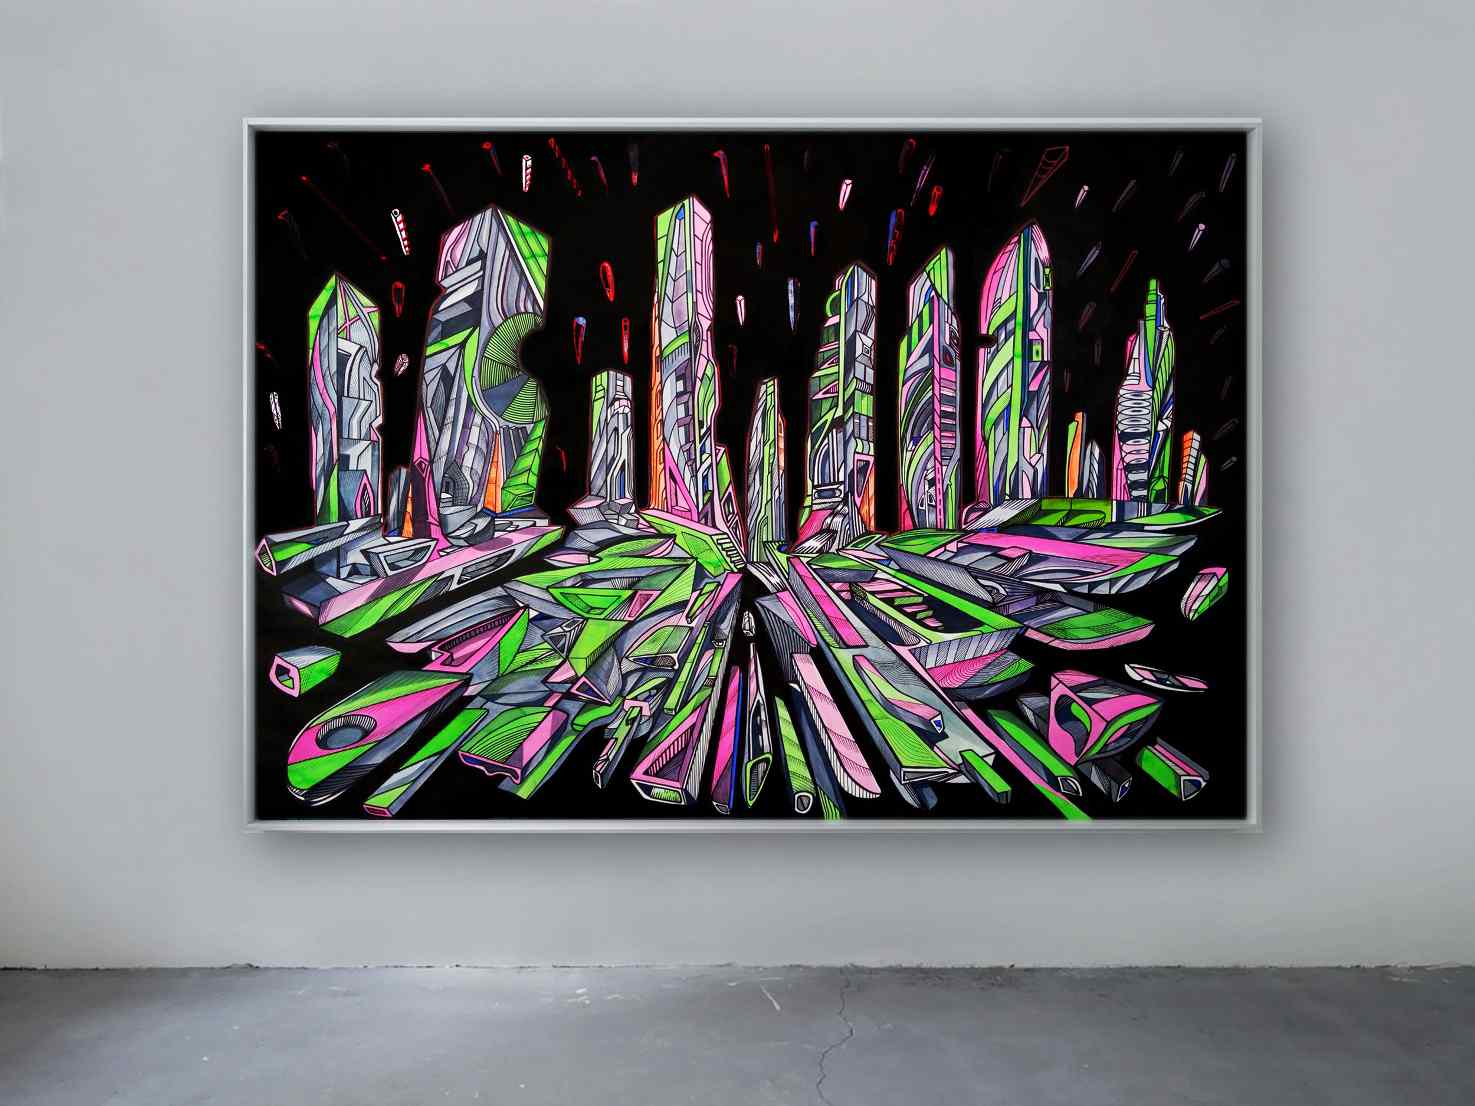 Source of Purple, Giclee on canvas, edition 1 of 70, 90 x 120 cm